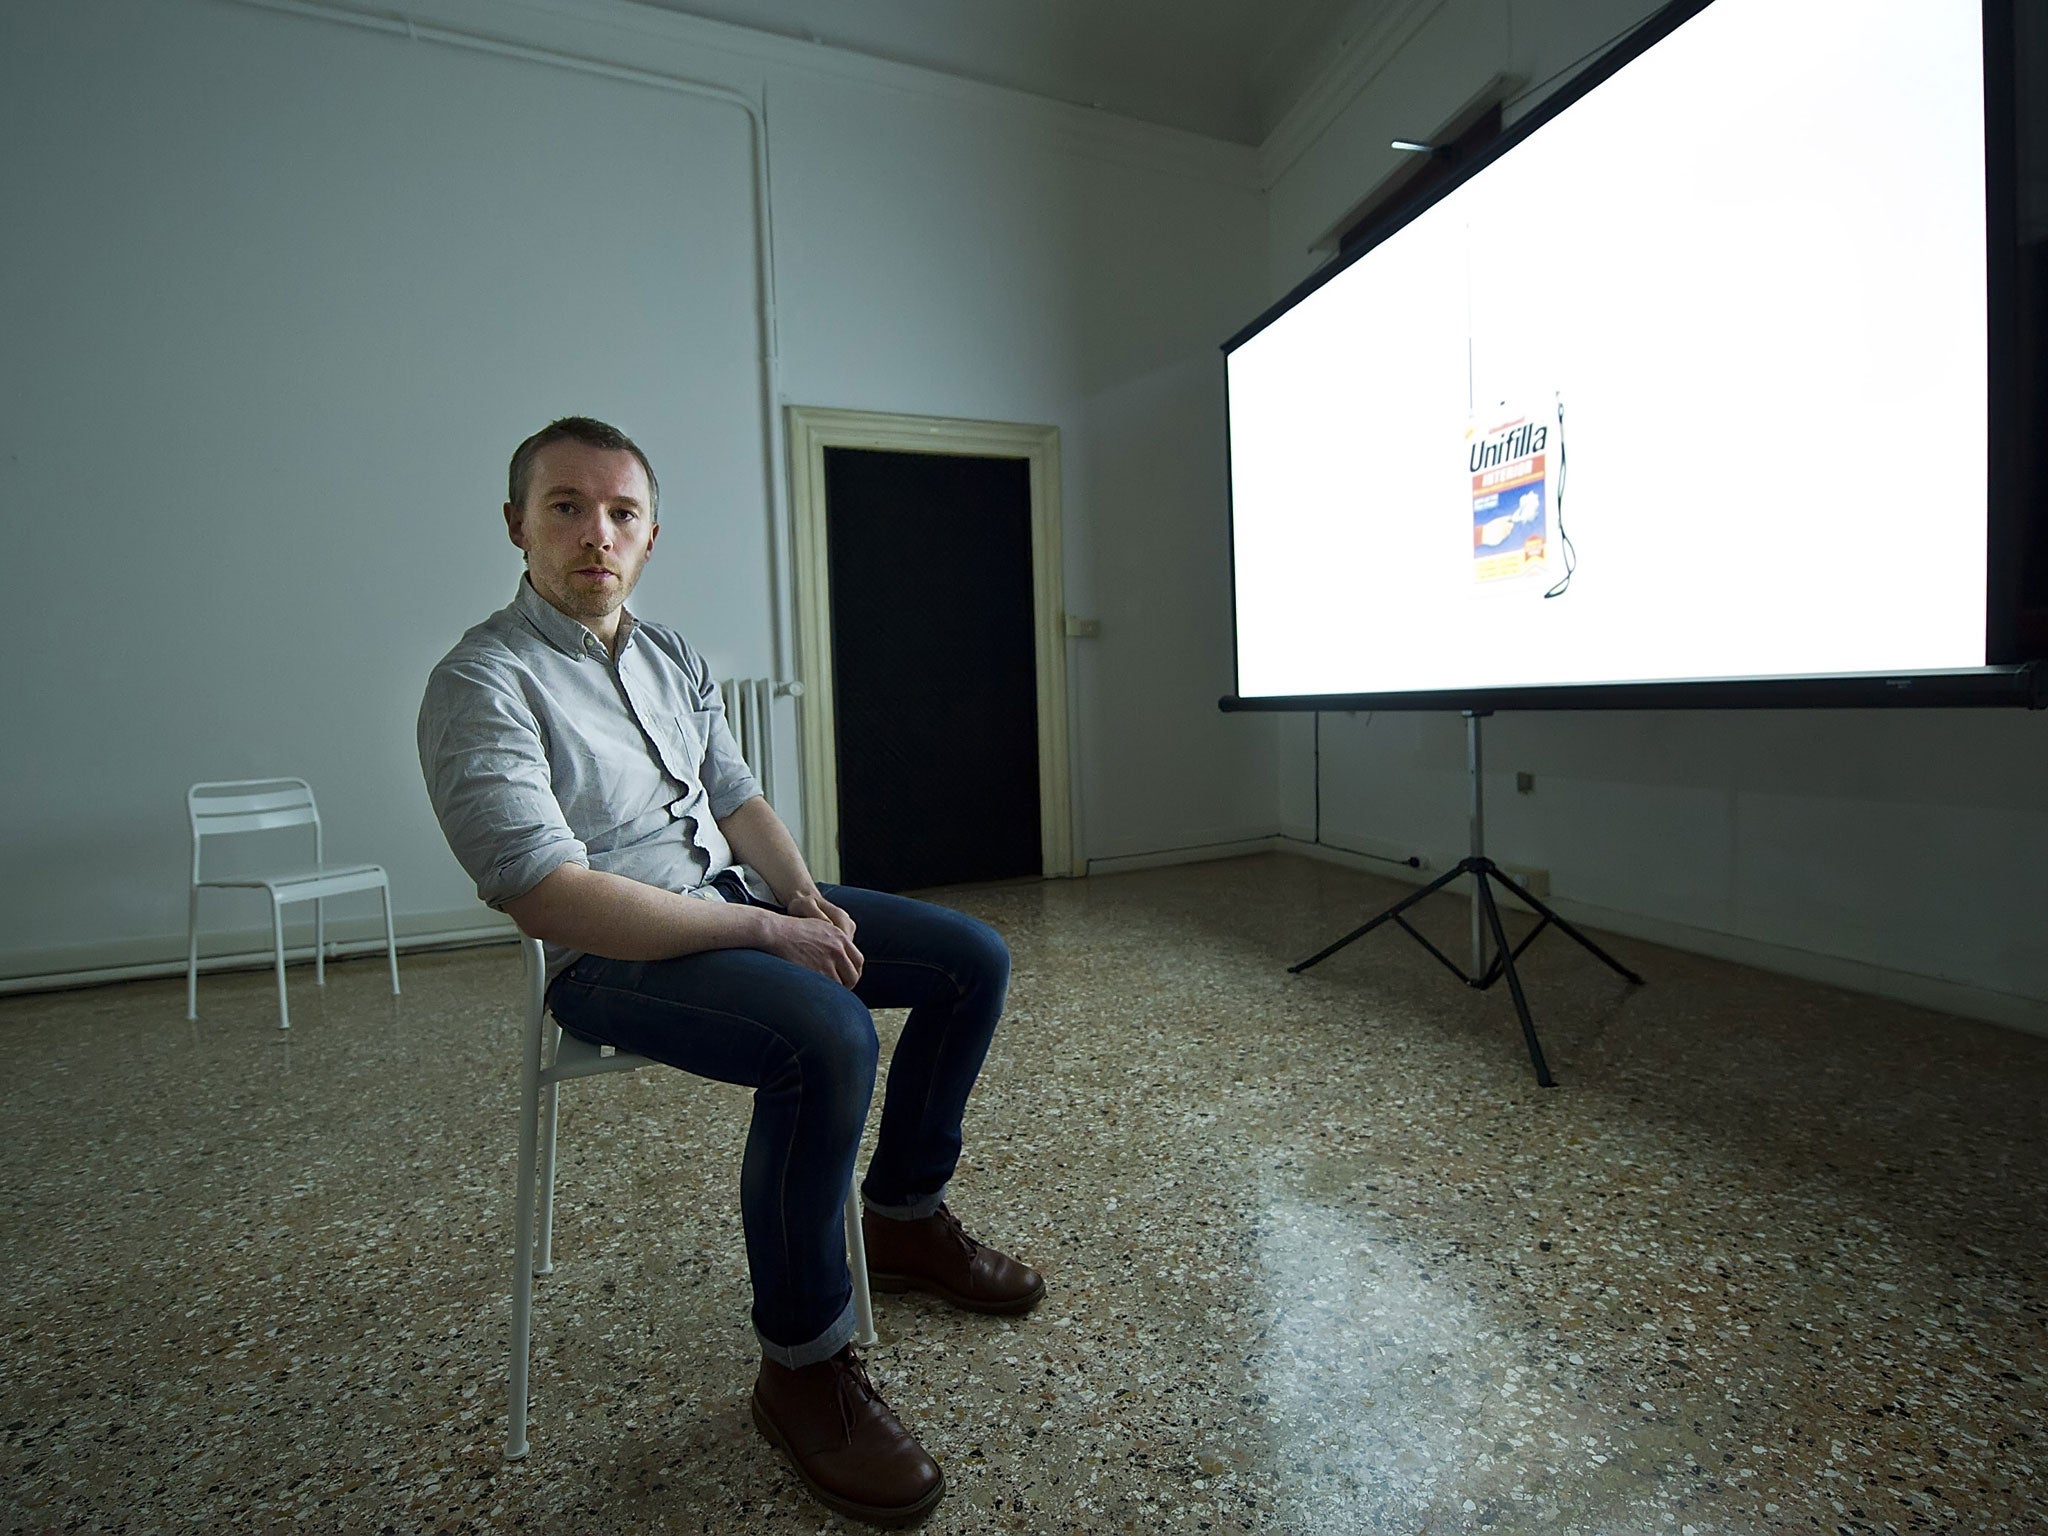 Turner Prize nominee Duncan Campbell is shortlisted for his presentation 'It Was Others'